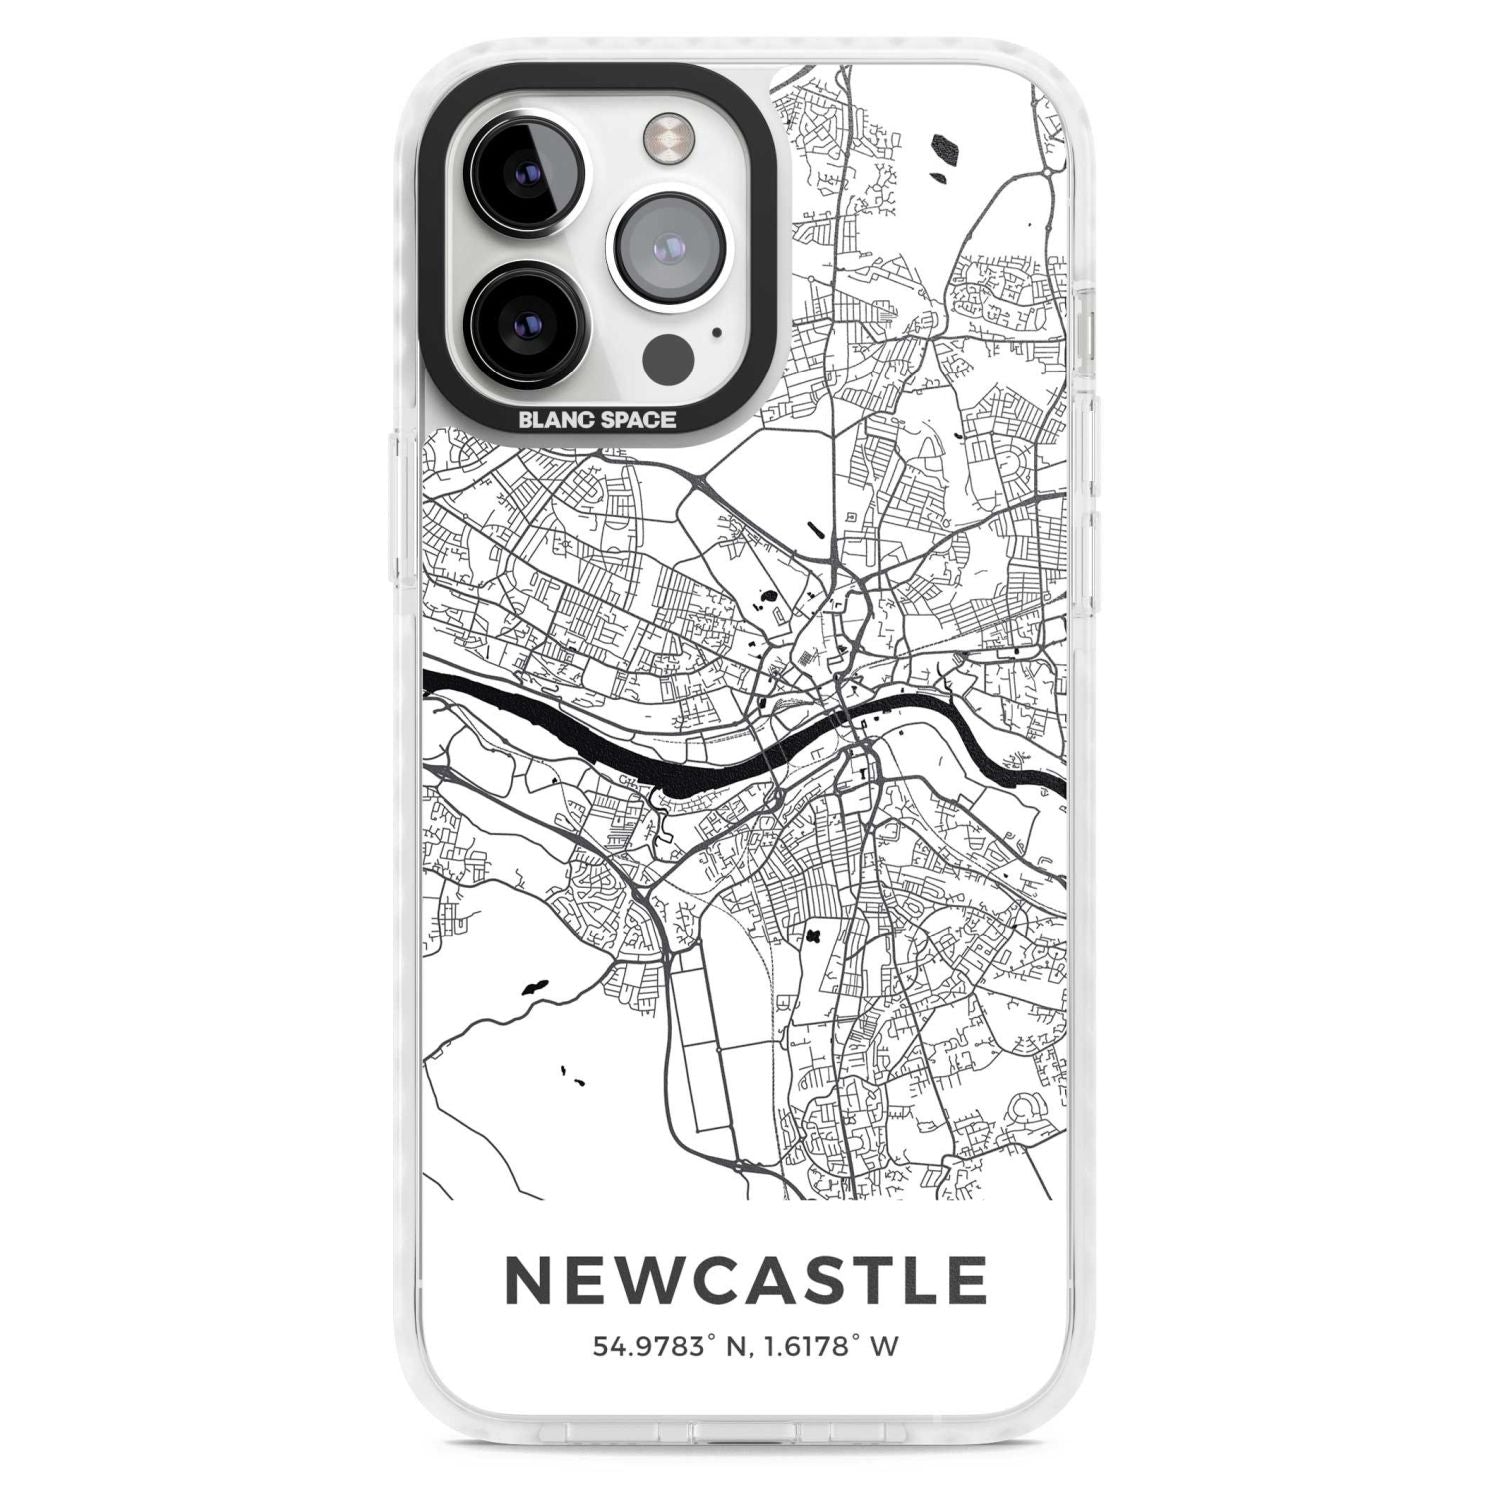 Map of Newcastle, England